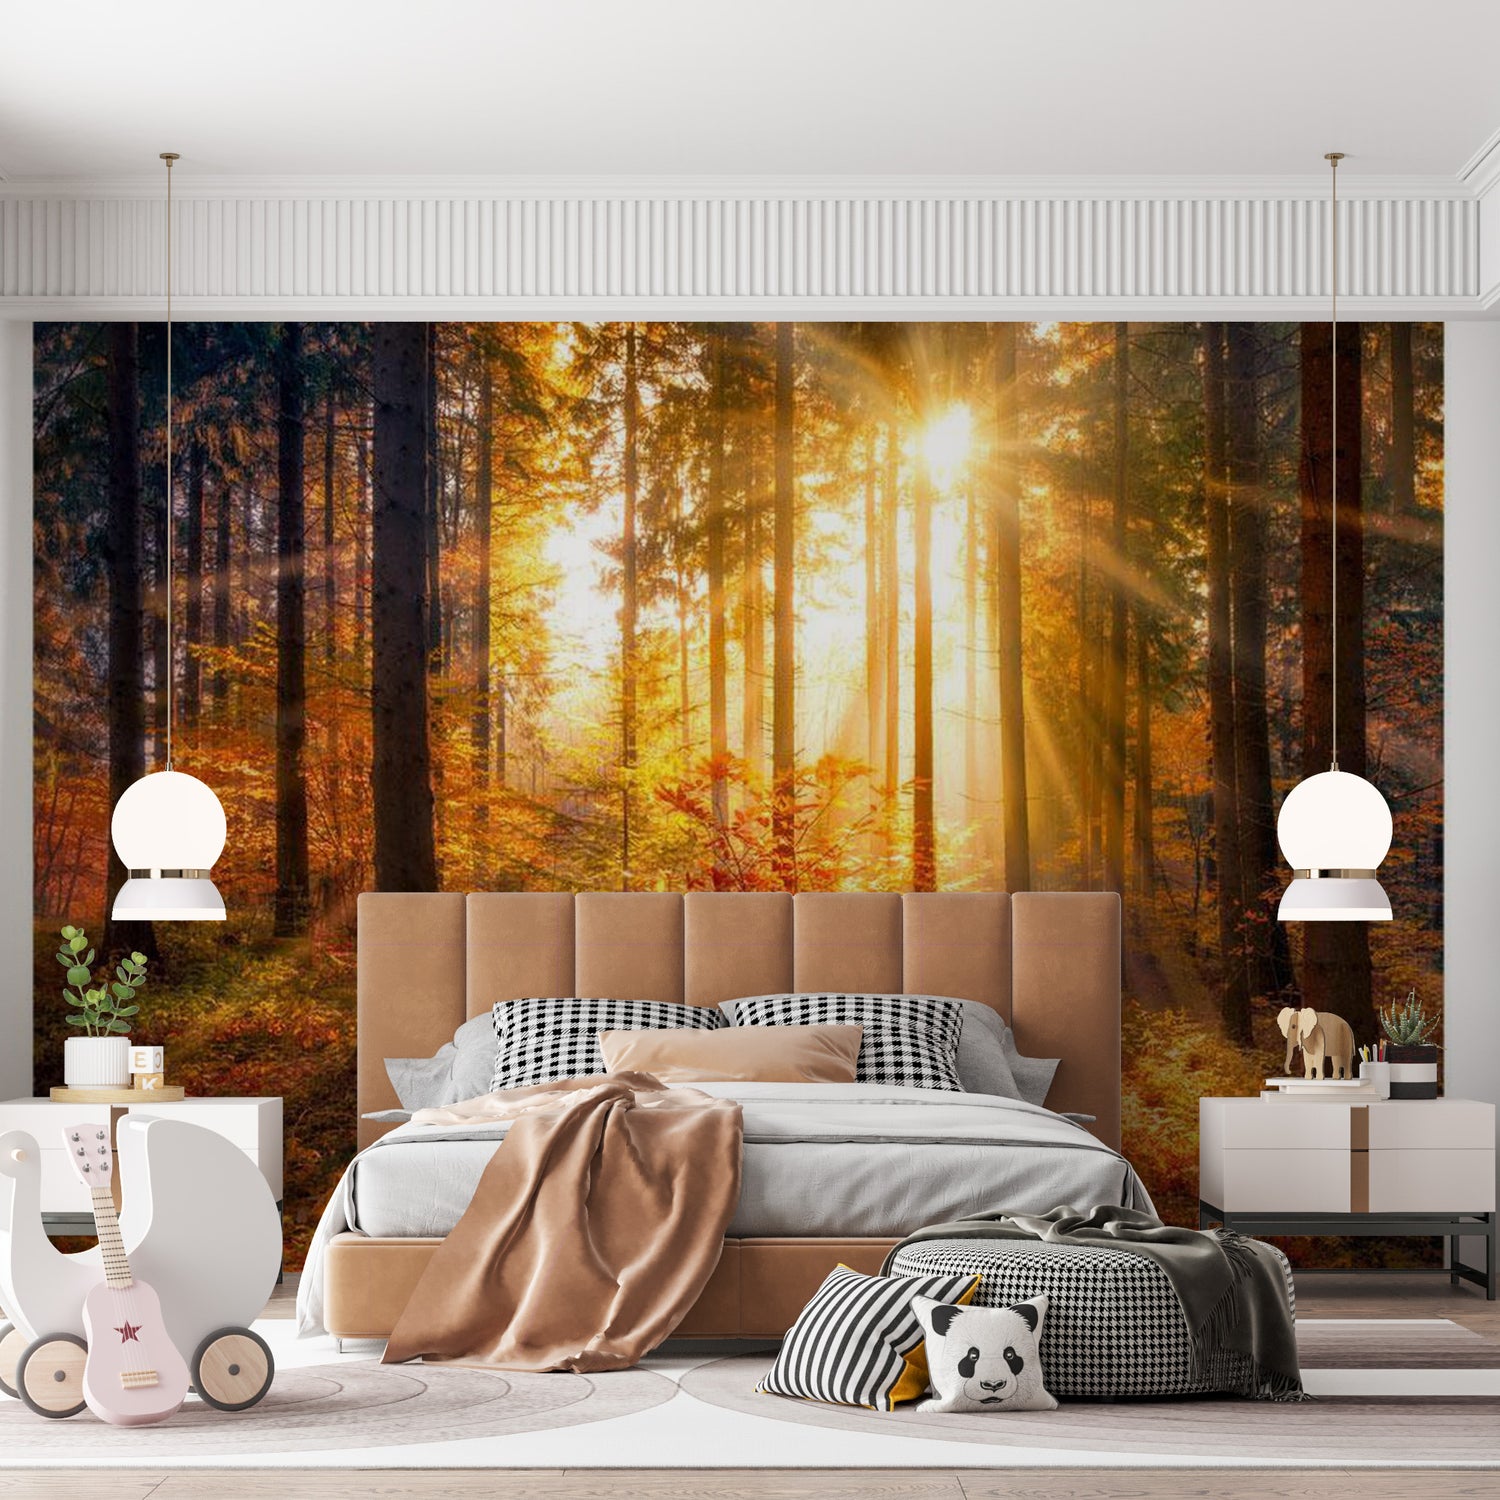 Peel & Stick Forest Wall Mural - Autumn Awakening - Removable Wall Decals